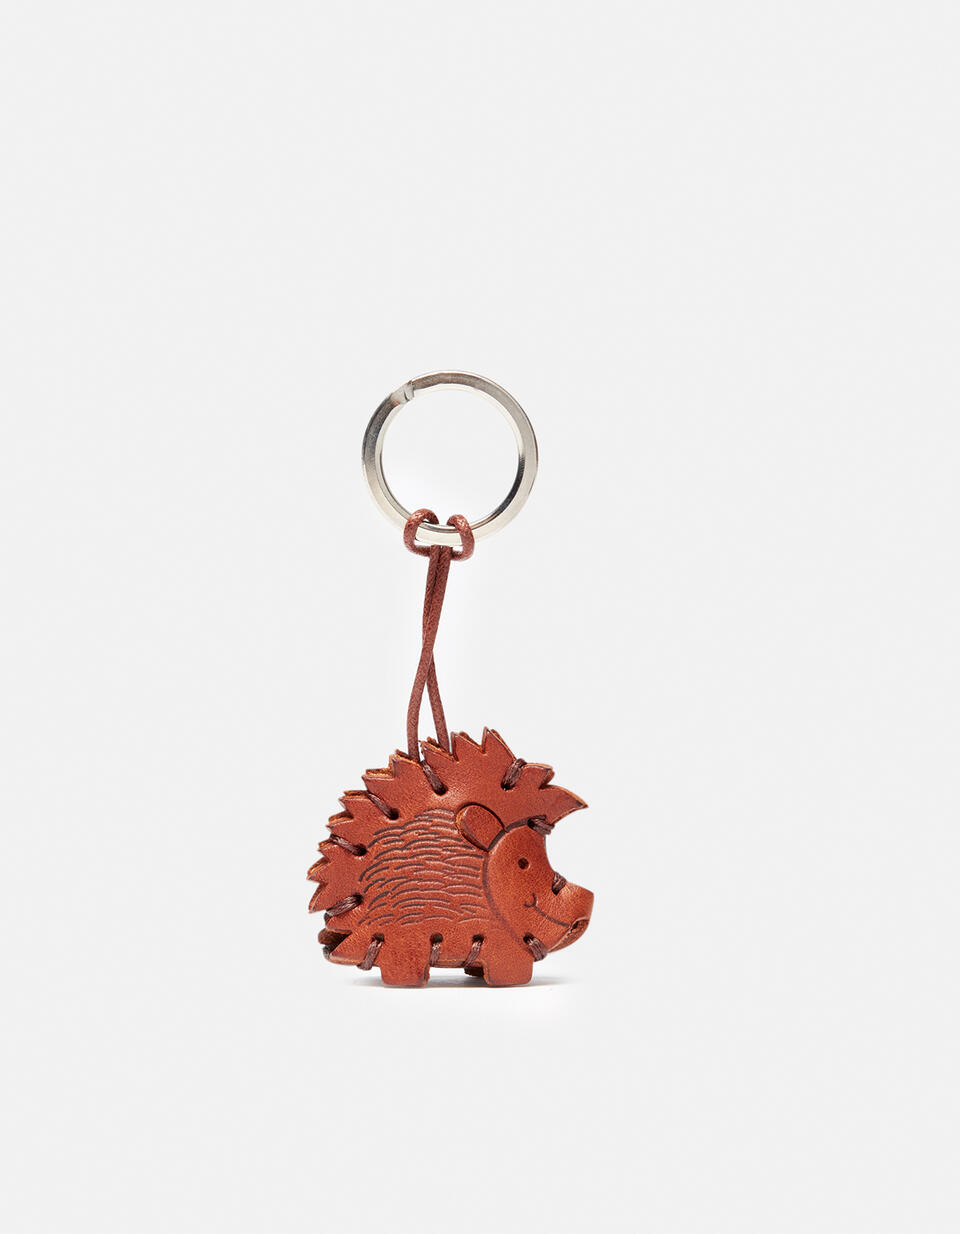 Keyring Brown  - Key Holders - Women's Accessories - Accessories - Cuoieria Fiorentina